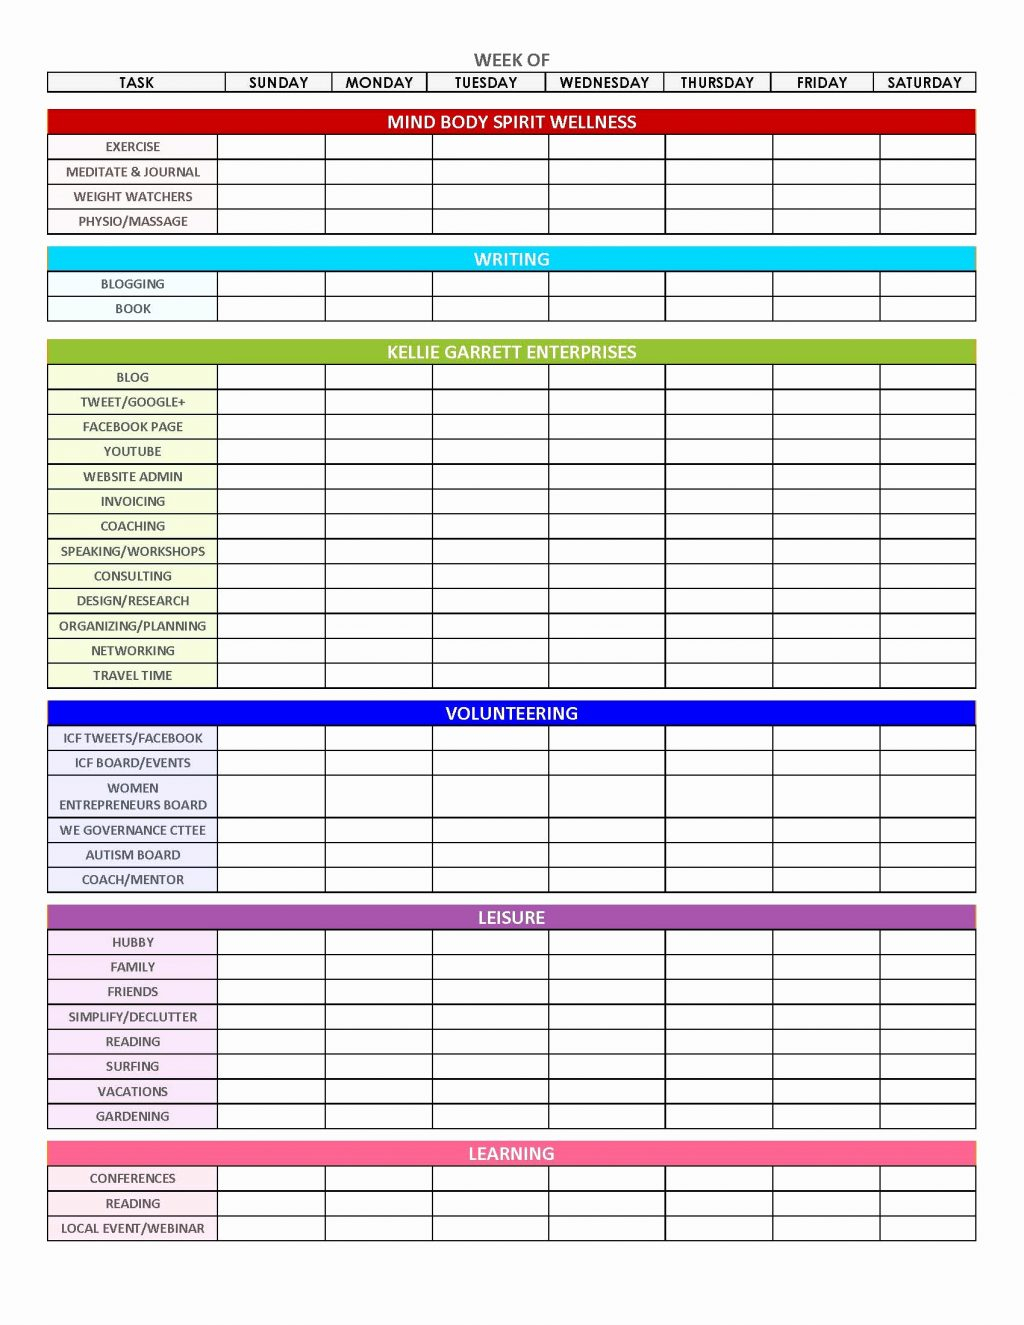 Time Tracking Spreadsheet Google In Timeing Spreadsheet Template Excel Free Project Time Tracking